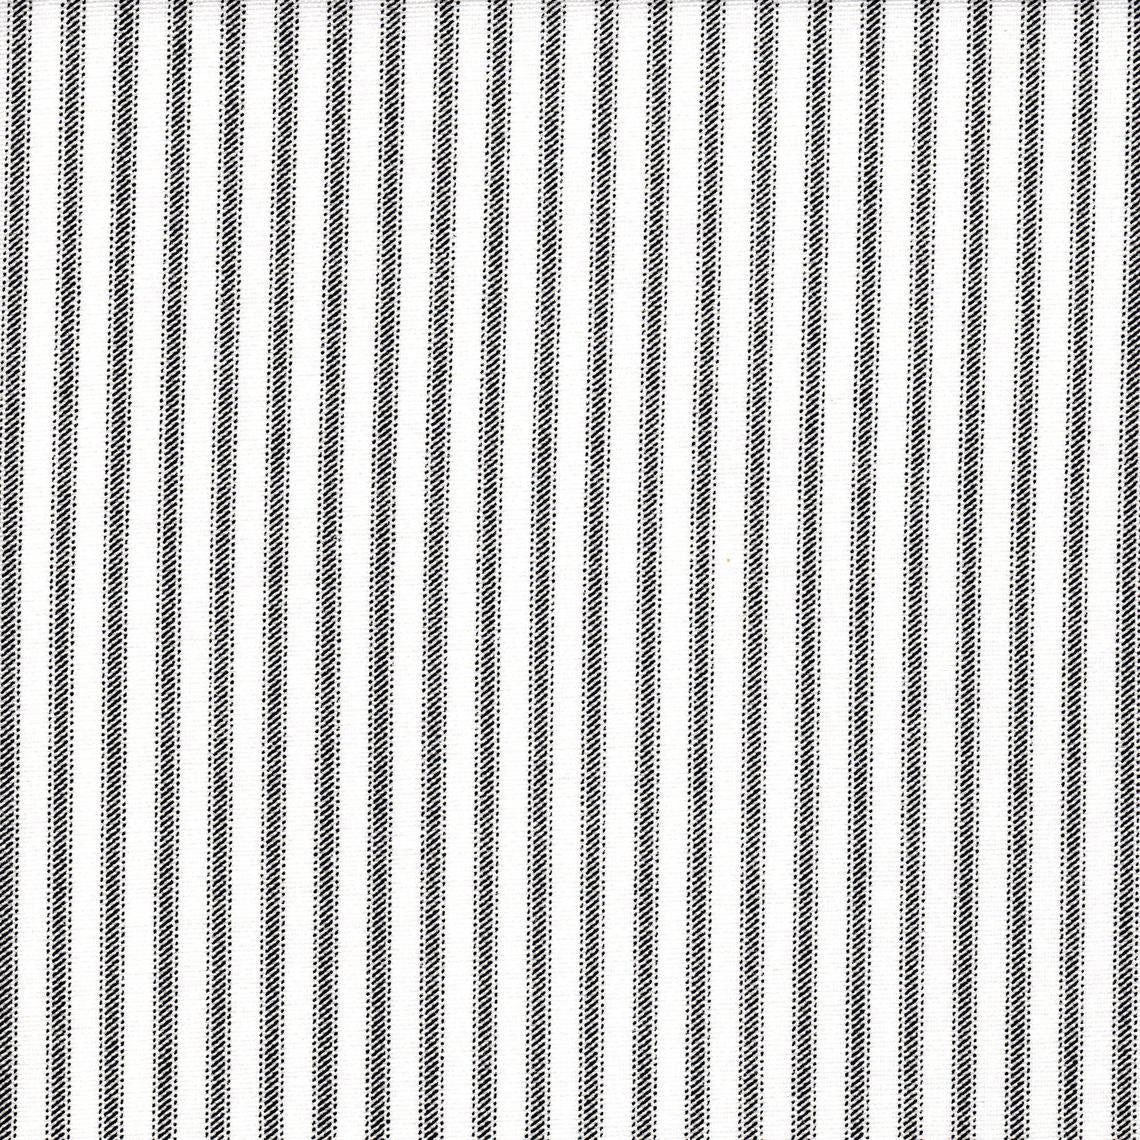 rod pocket curtain panels pair in classic black ticking stripe on white